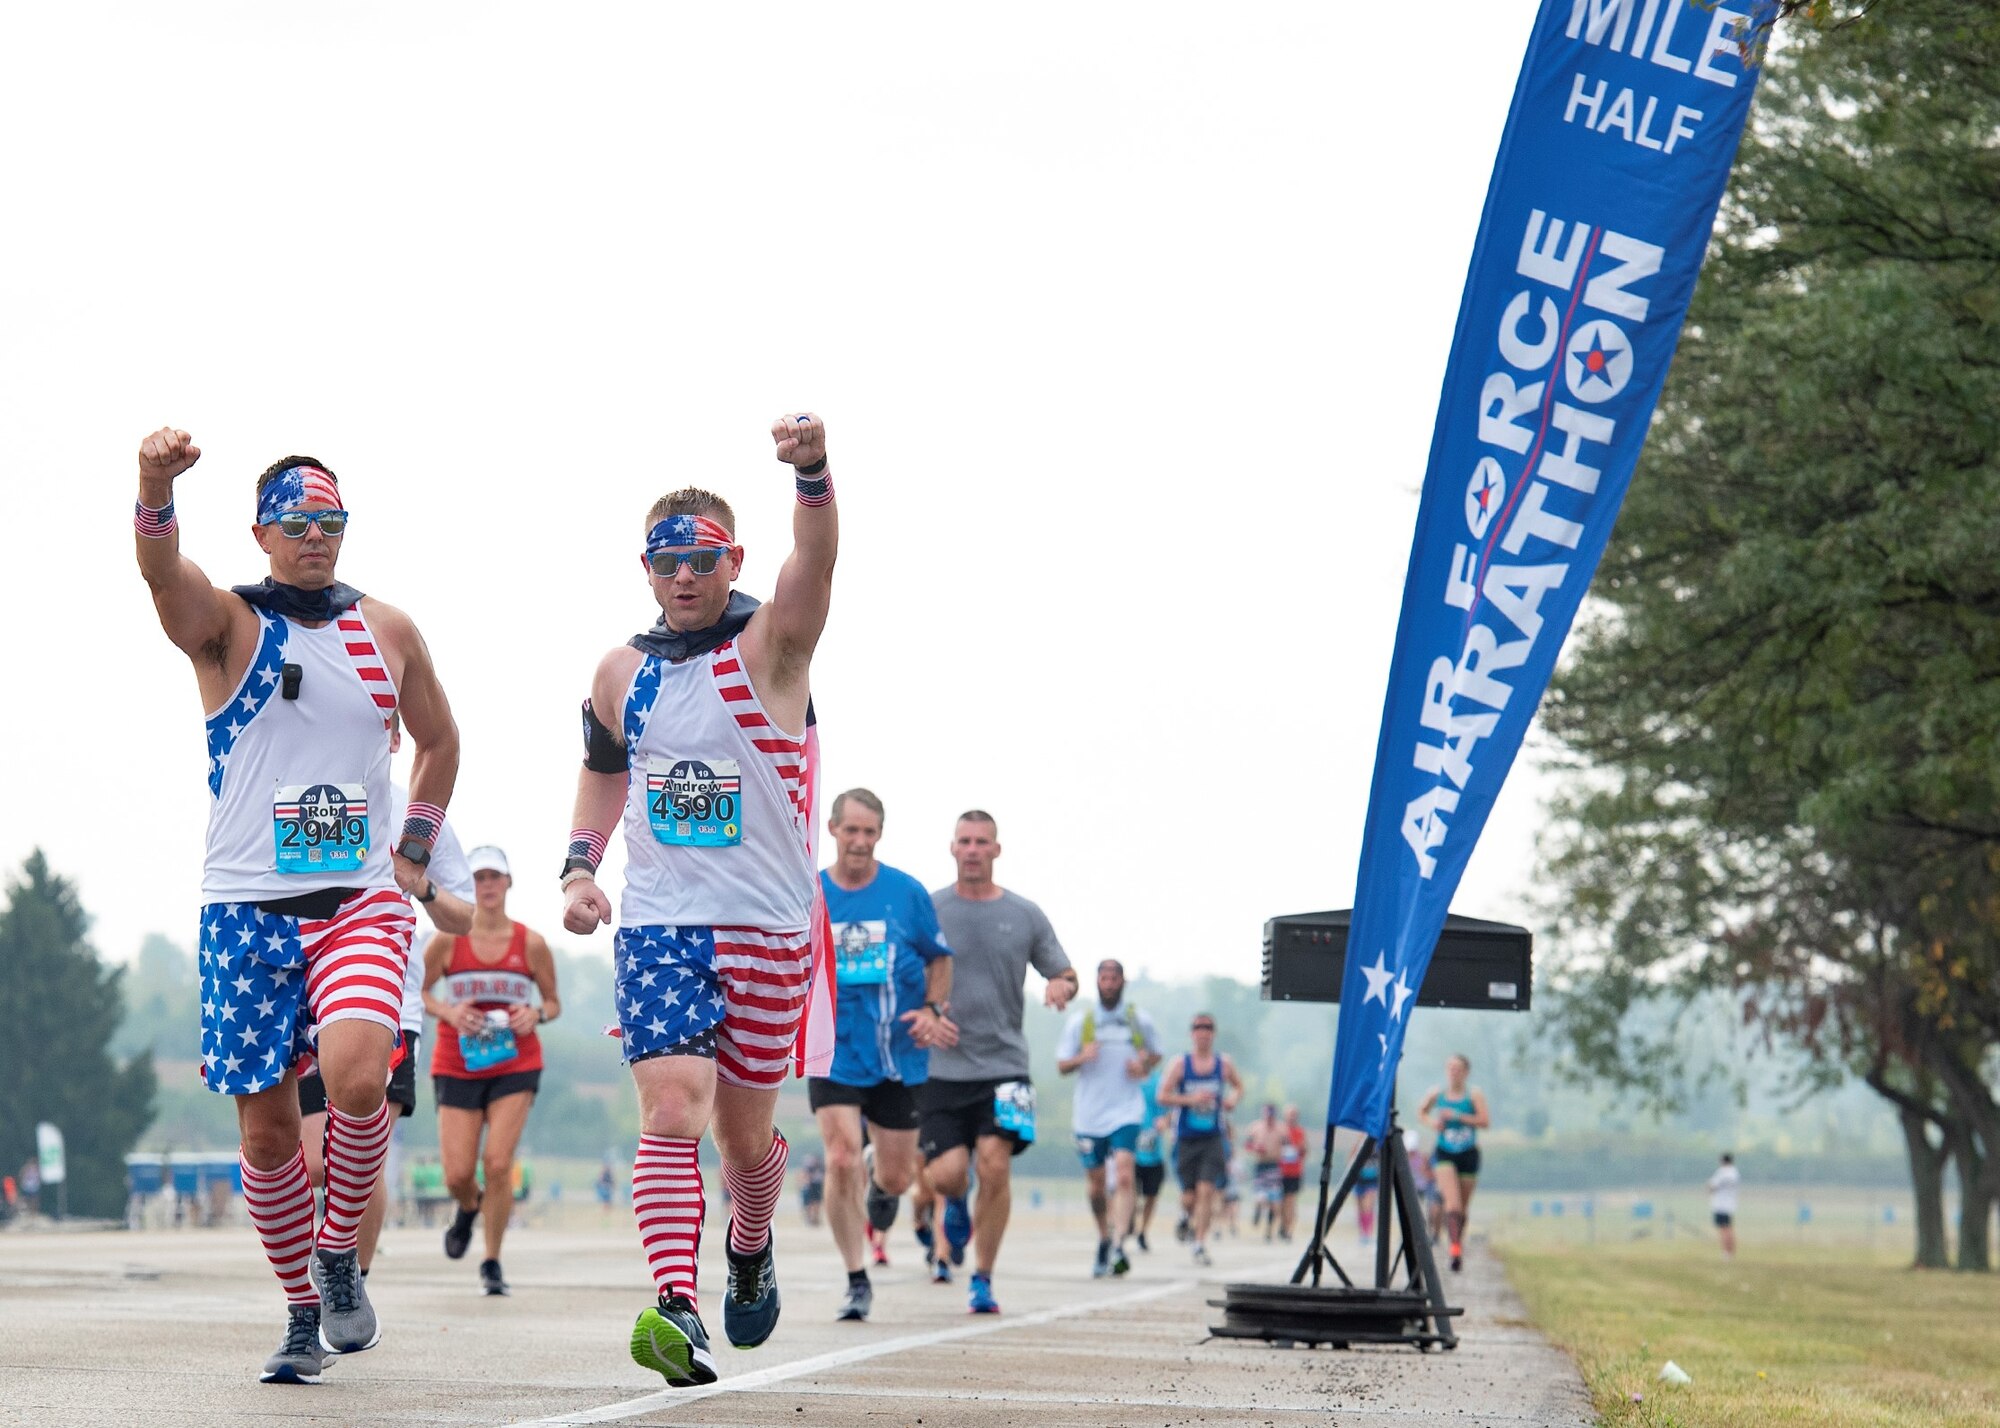 The 2020 Air Force Marathon registration will open on Jan. 1 with a New Year’s resolution special and will be valid through Jan. 3. Prices will increase throughout the year leading up the Air Force Marathon on Sept. 19. (U.S. Air Force photo/Michelle Gigante)